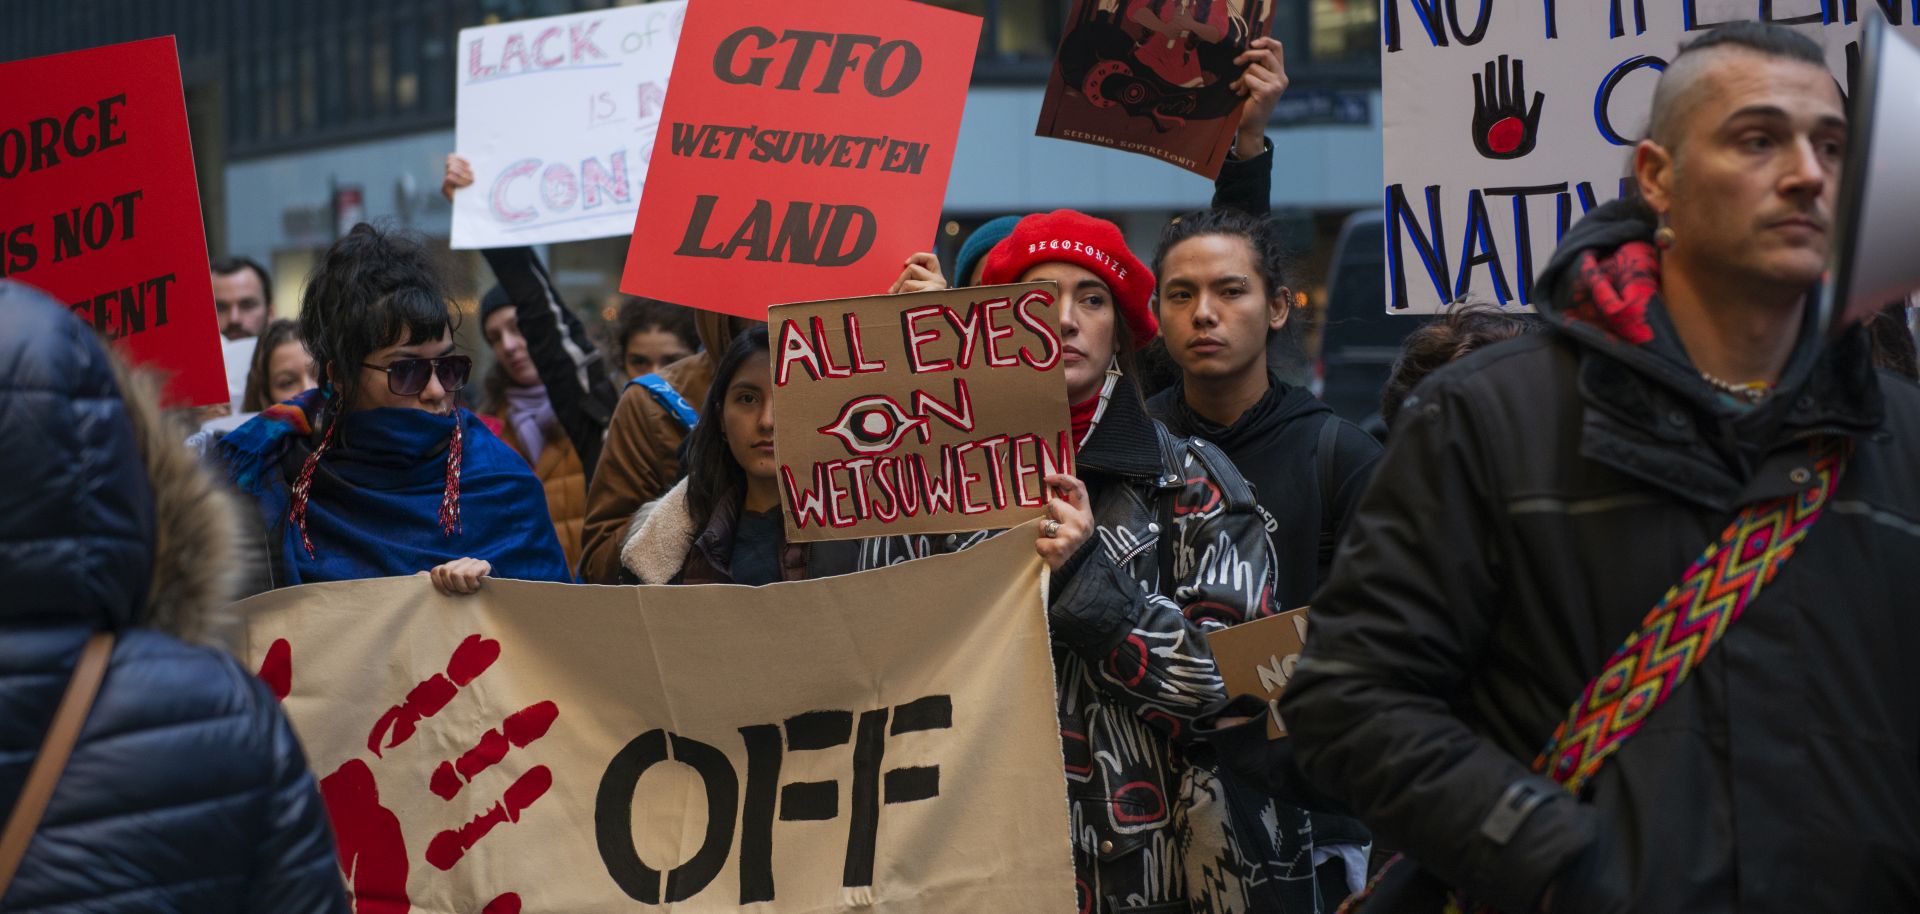 A demonstration in solidarity with the Wet'suwet'en pipeline protest on Feb. 18, 2020, outside the Canadian Consulate in New York. Disruptions to supply chains will remain the most obvious impact, but whether this spreads to new targets and geographically, including to the United States, will be important to monitor.